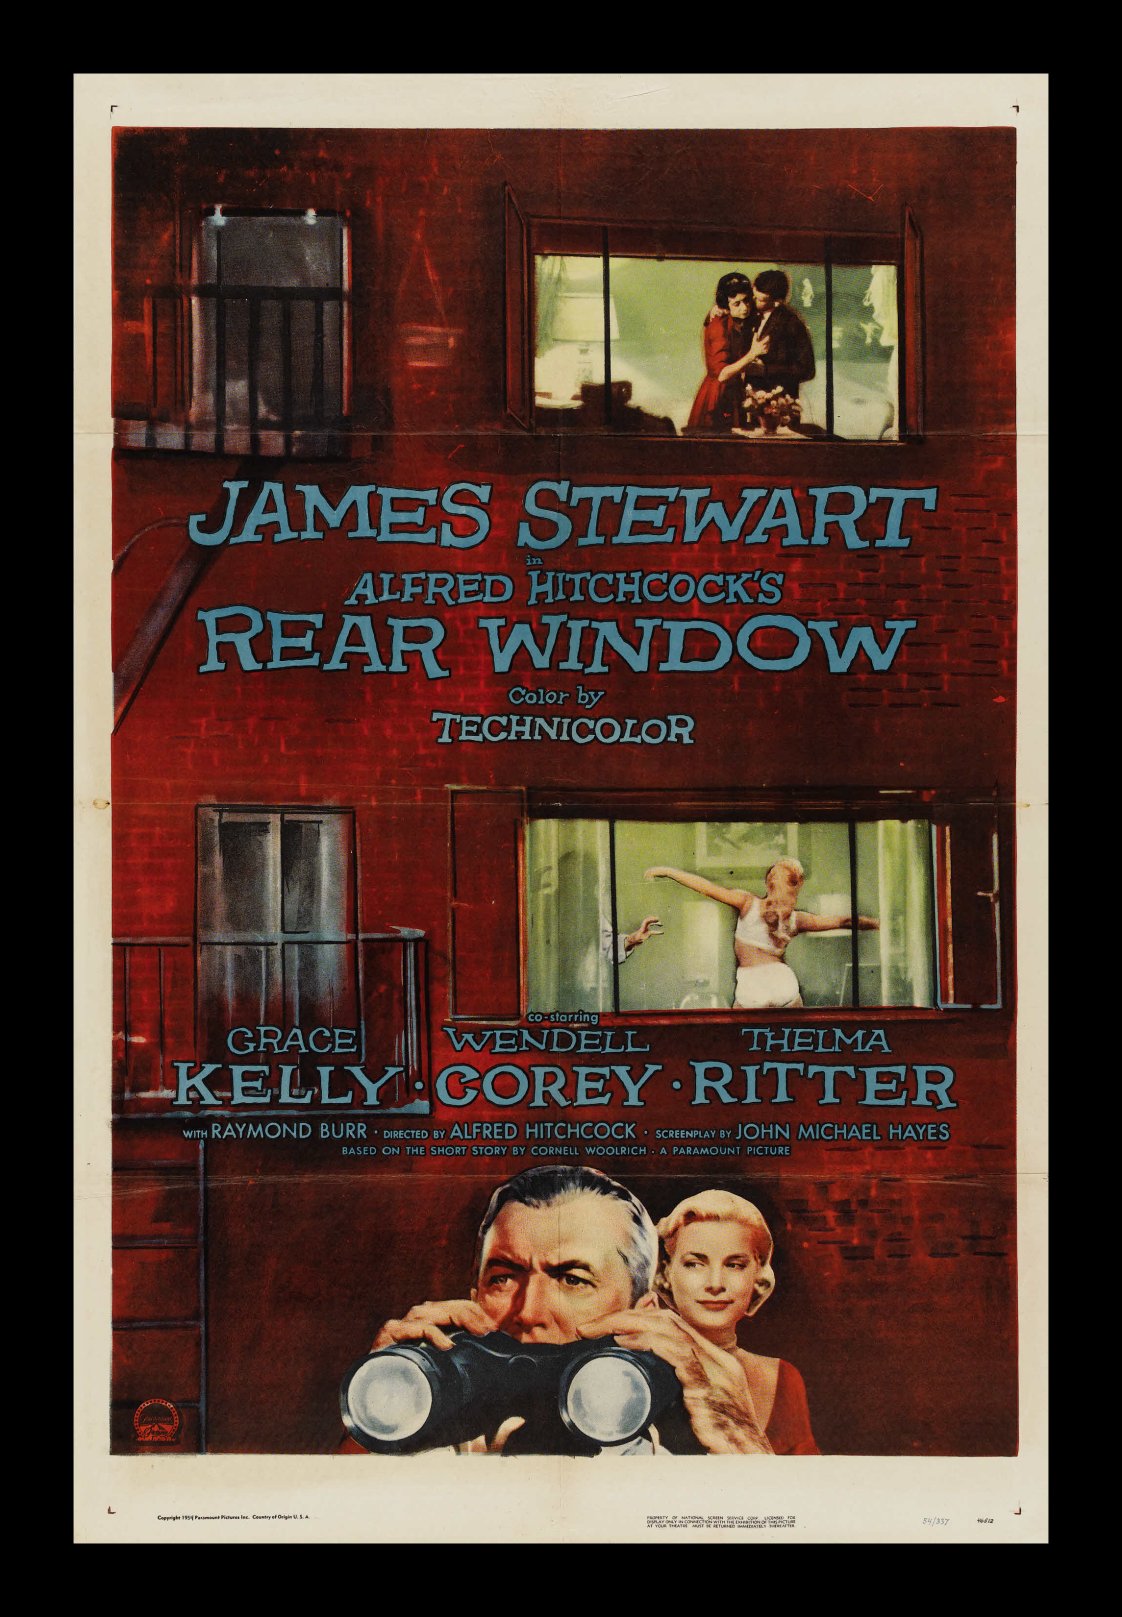 55th anniversary of rear Window. Eavesdropping with Johnny